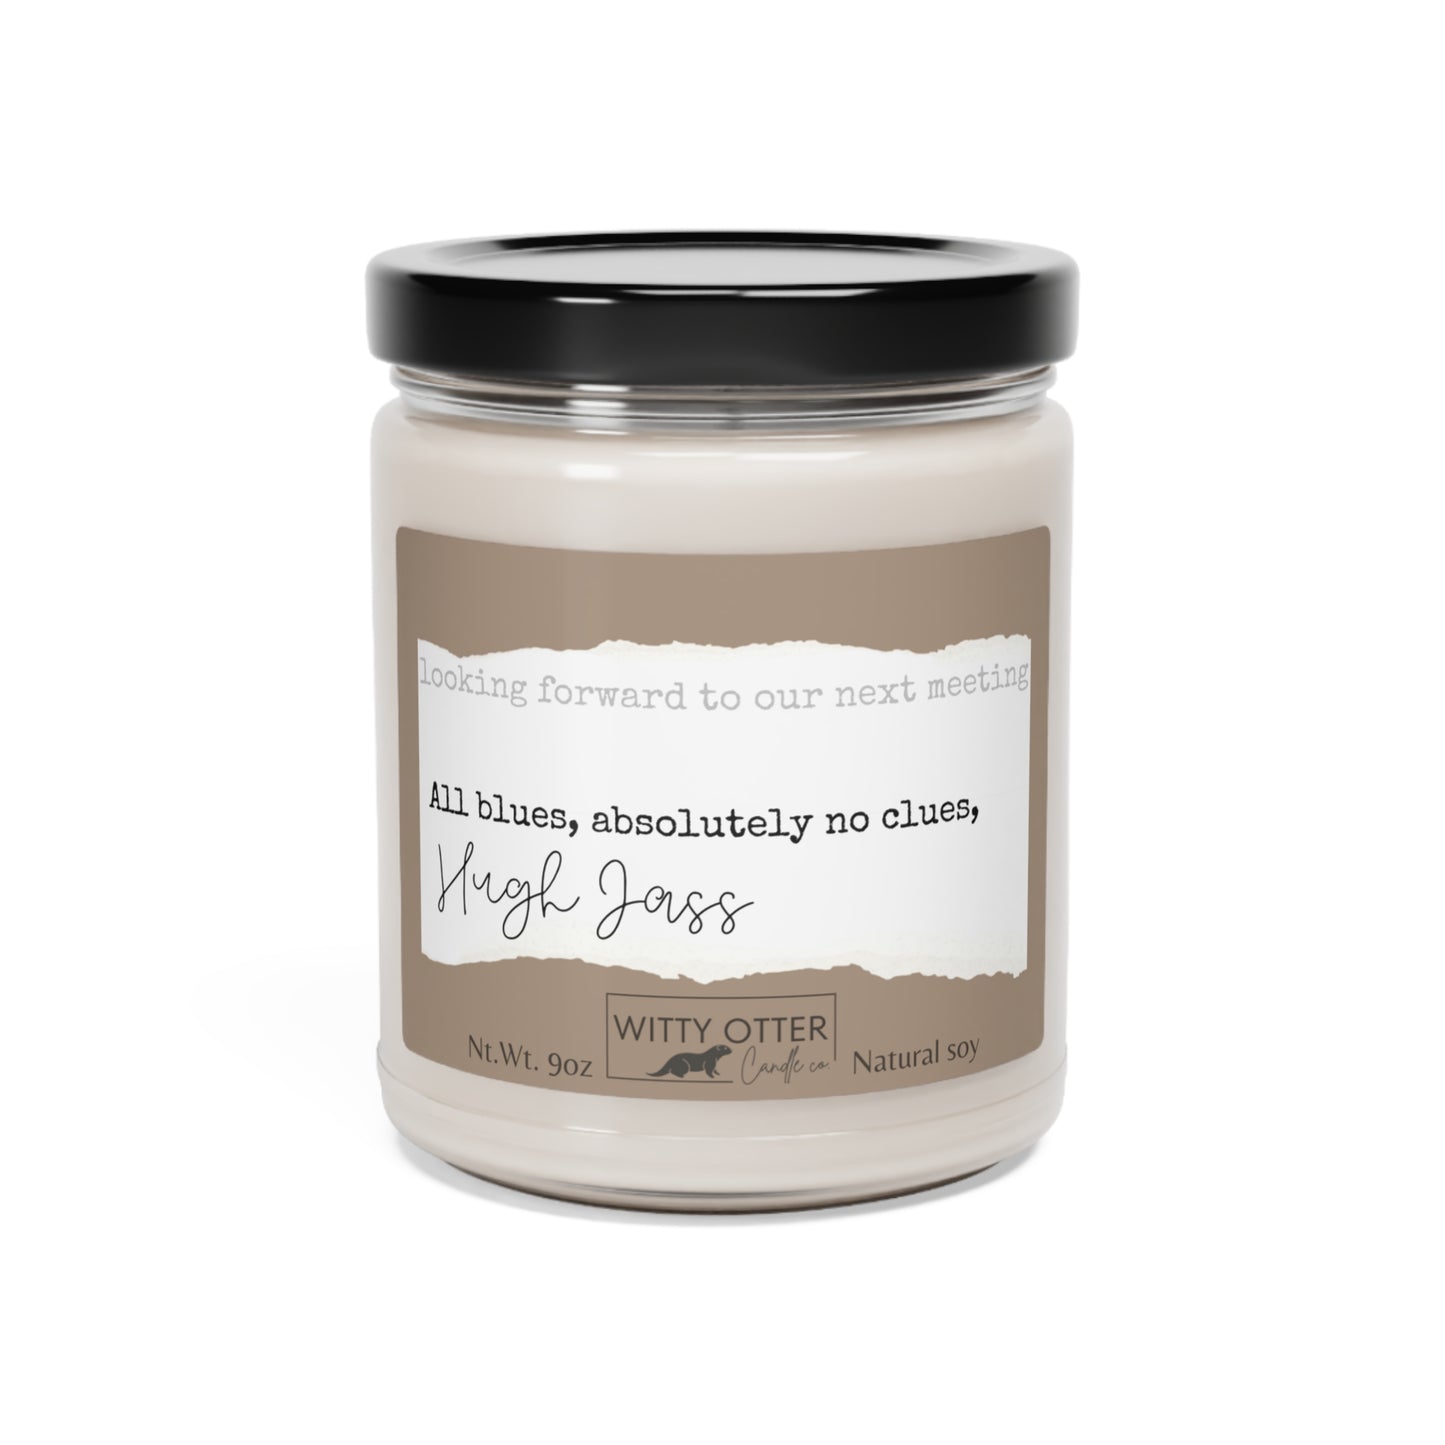 Hilarious office "signature" scented Soy Candle, 9oz - "All blues, absolutely no clues" signed candle